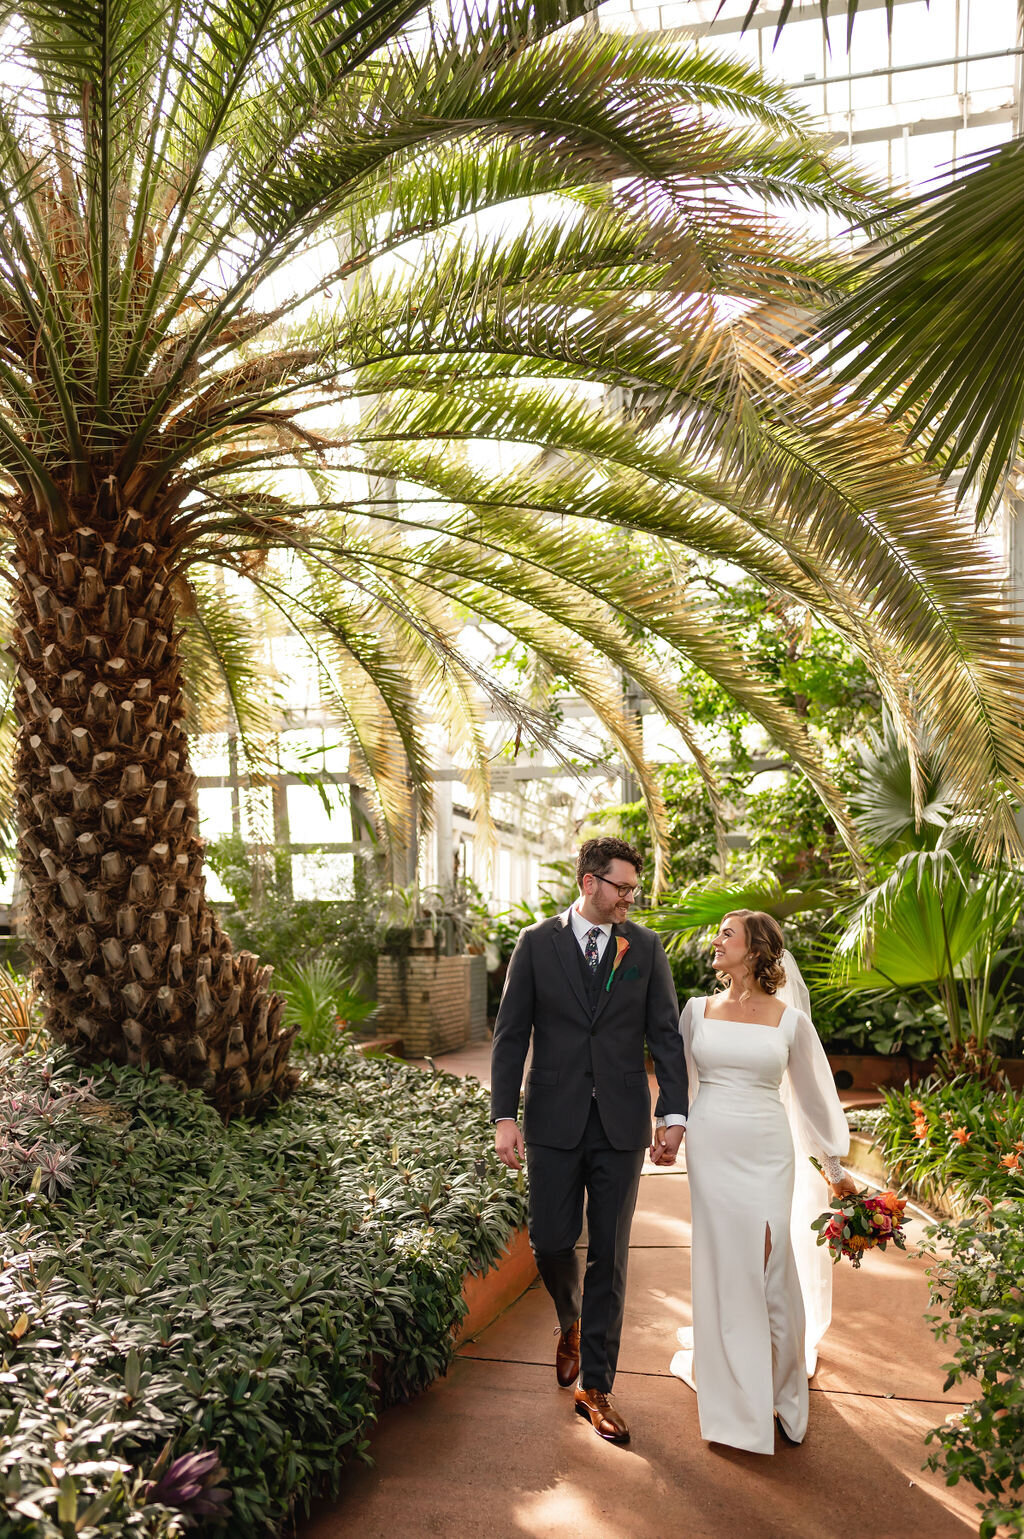 Couple walk by palm trees in Garfield Park Conservatory